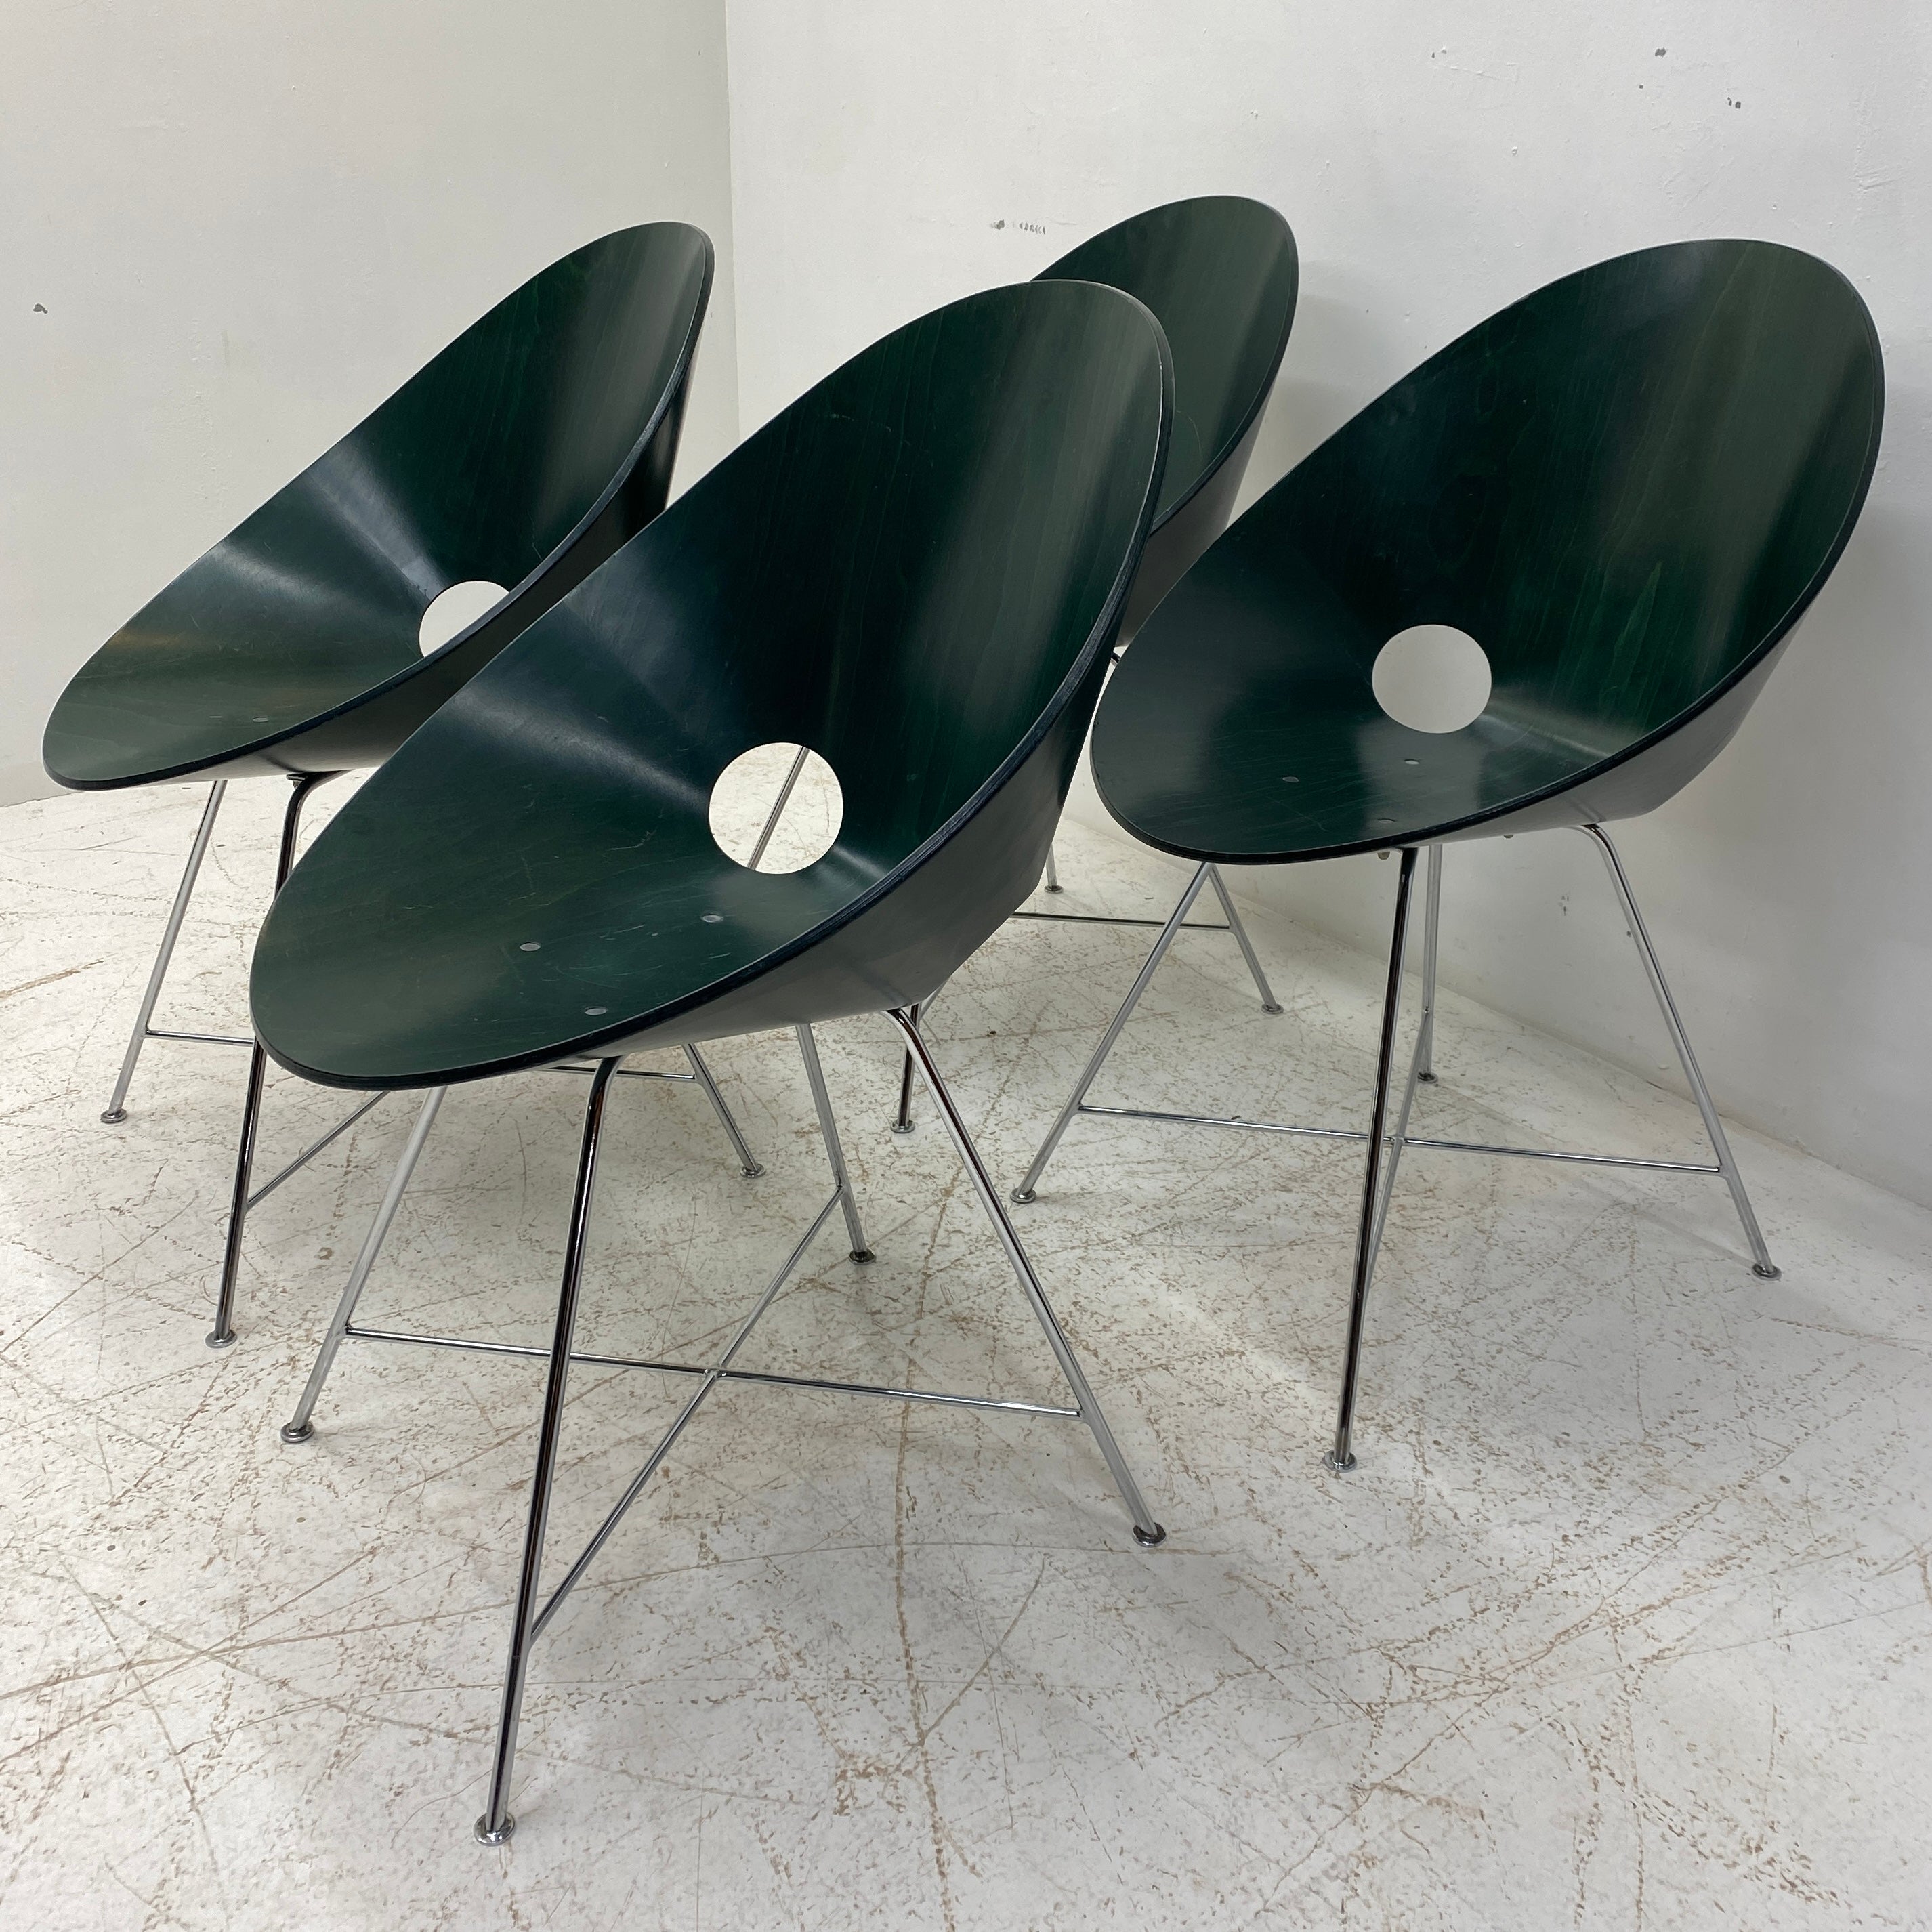 Four Green Shell Dining Chairs Eddie Harlis